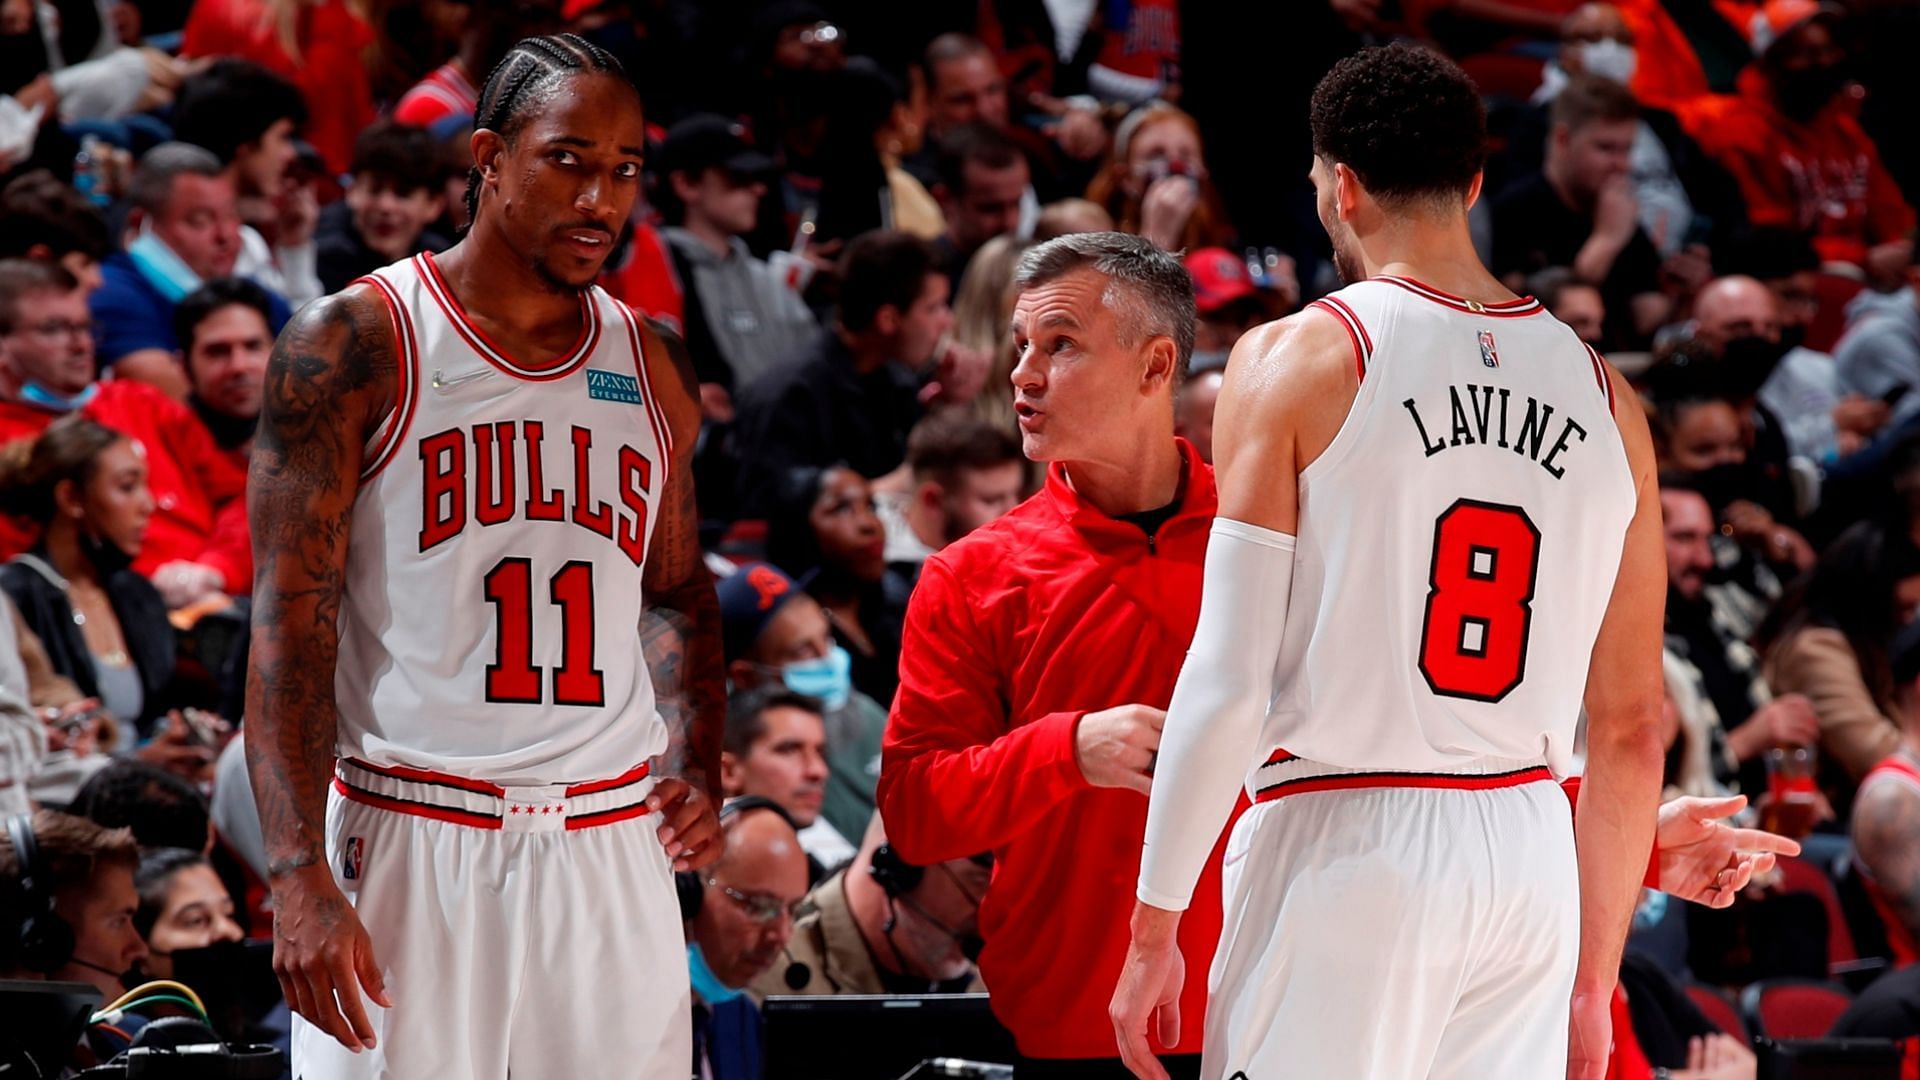 DeMar DeRozan and Zach LaVine could lead the Chicago Bulls to the top of the East this season [Photo: Sporting News]